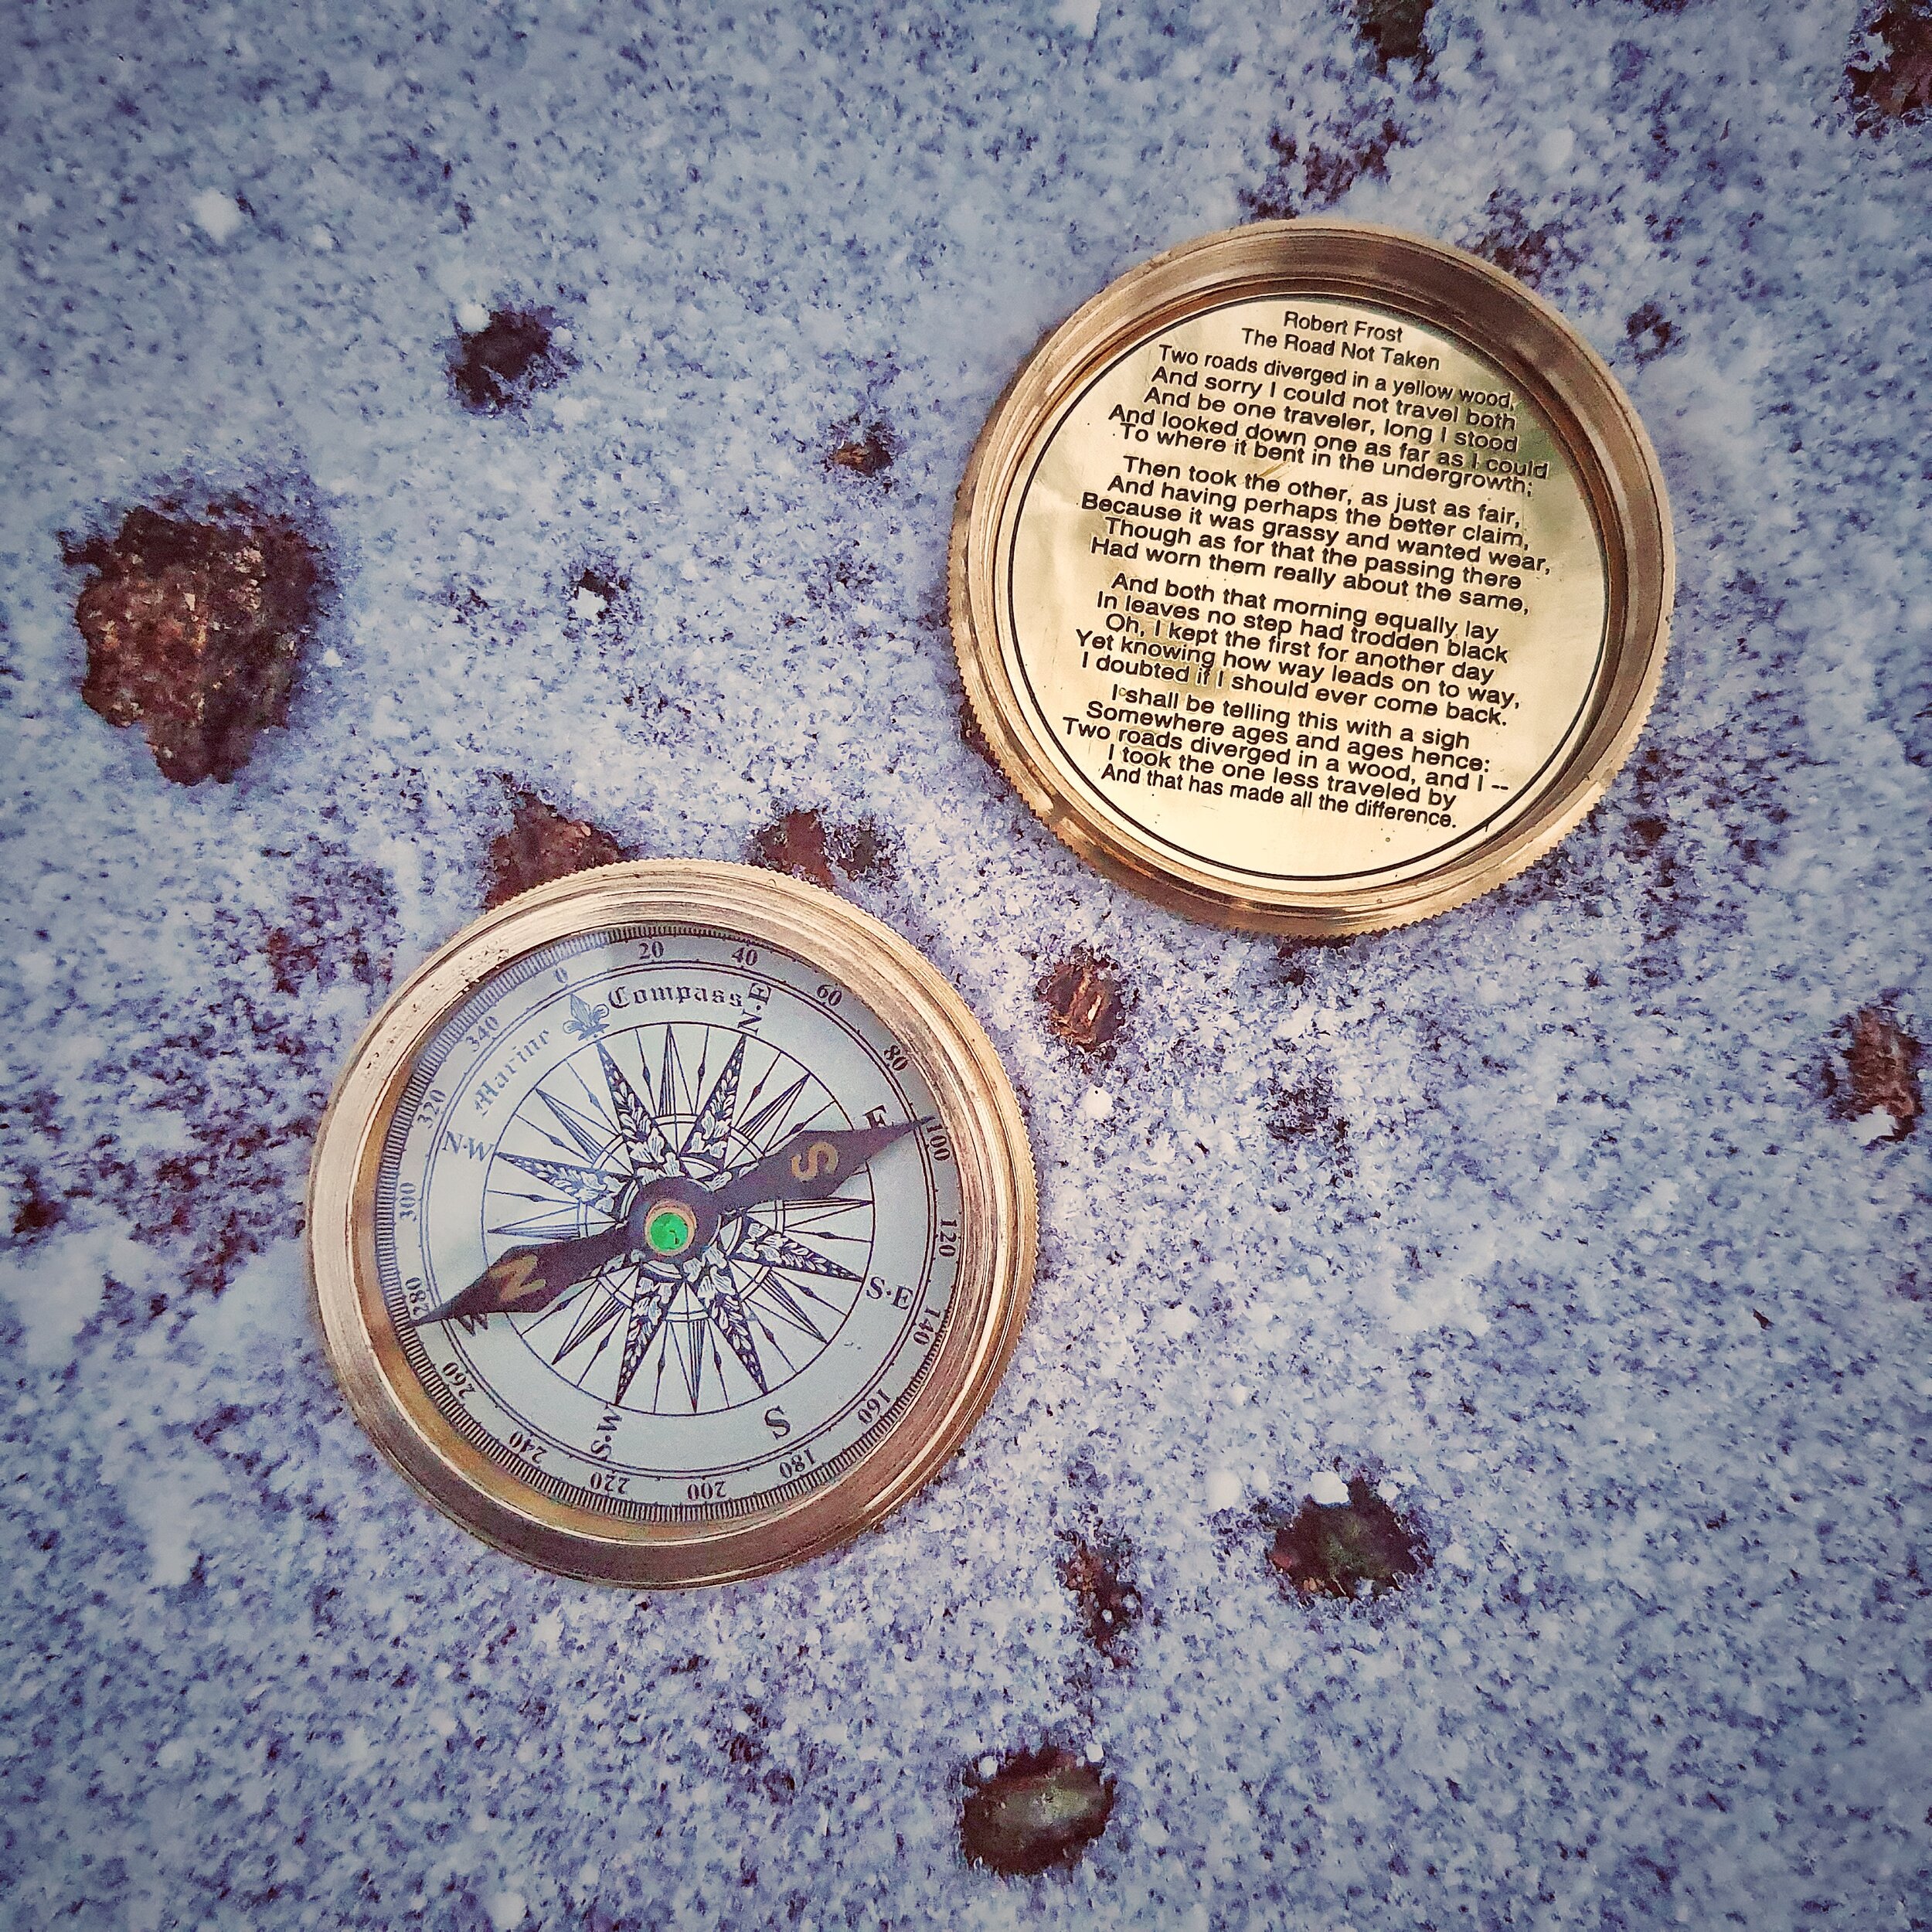 The Road Not Taken By Robert Frost Antique Solid Brass Working Compass Engraved Needle Compass With Leather Anchor Stamped Case